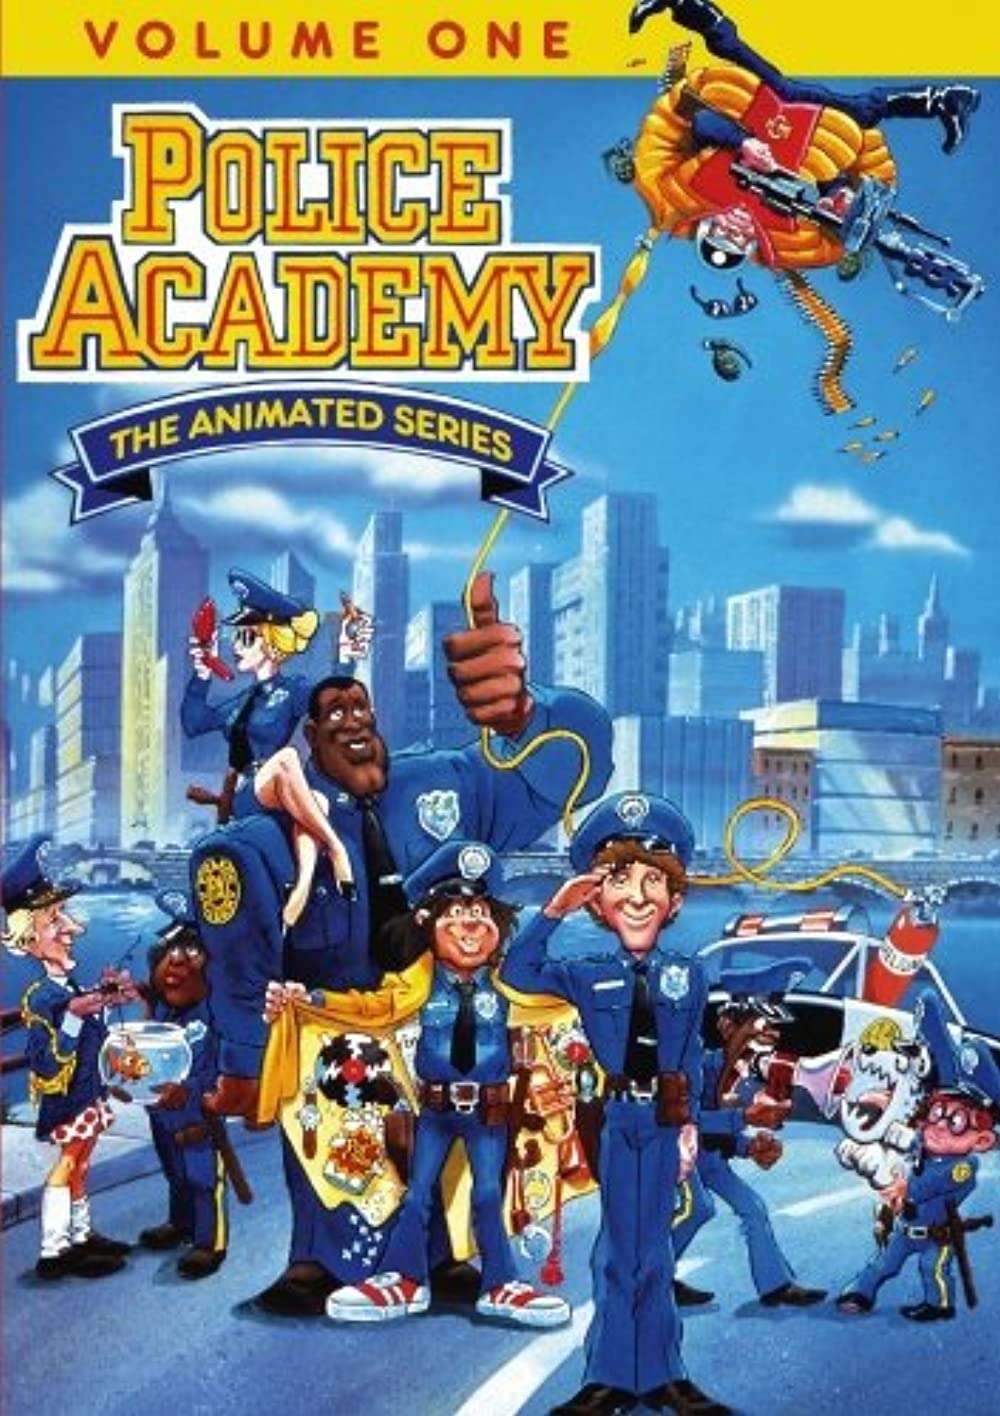 Police Academy The Animated Series (1988–1989)